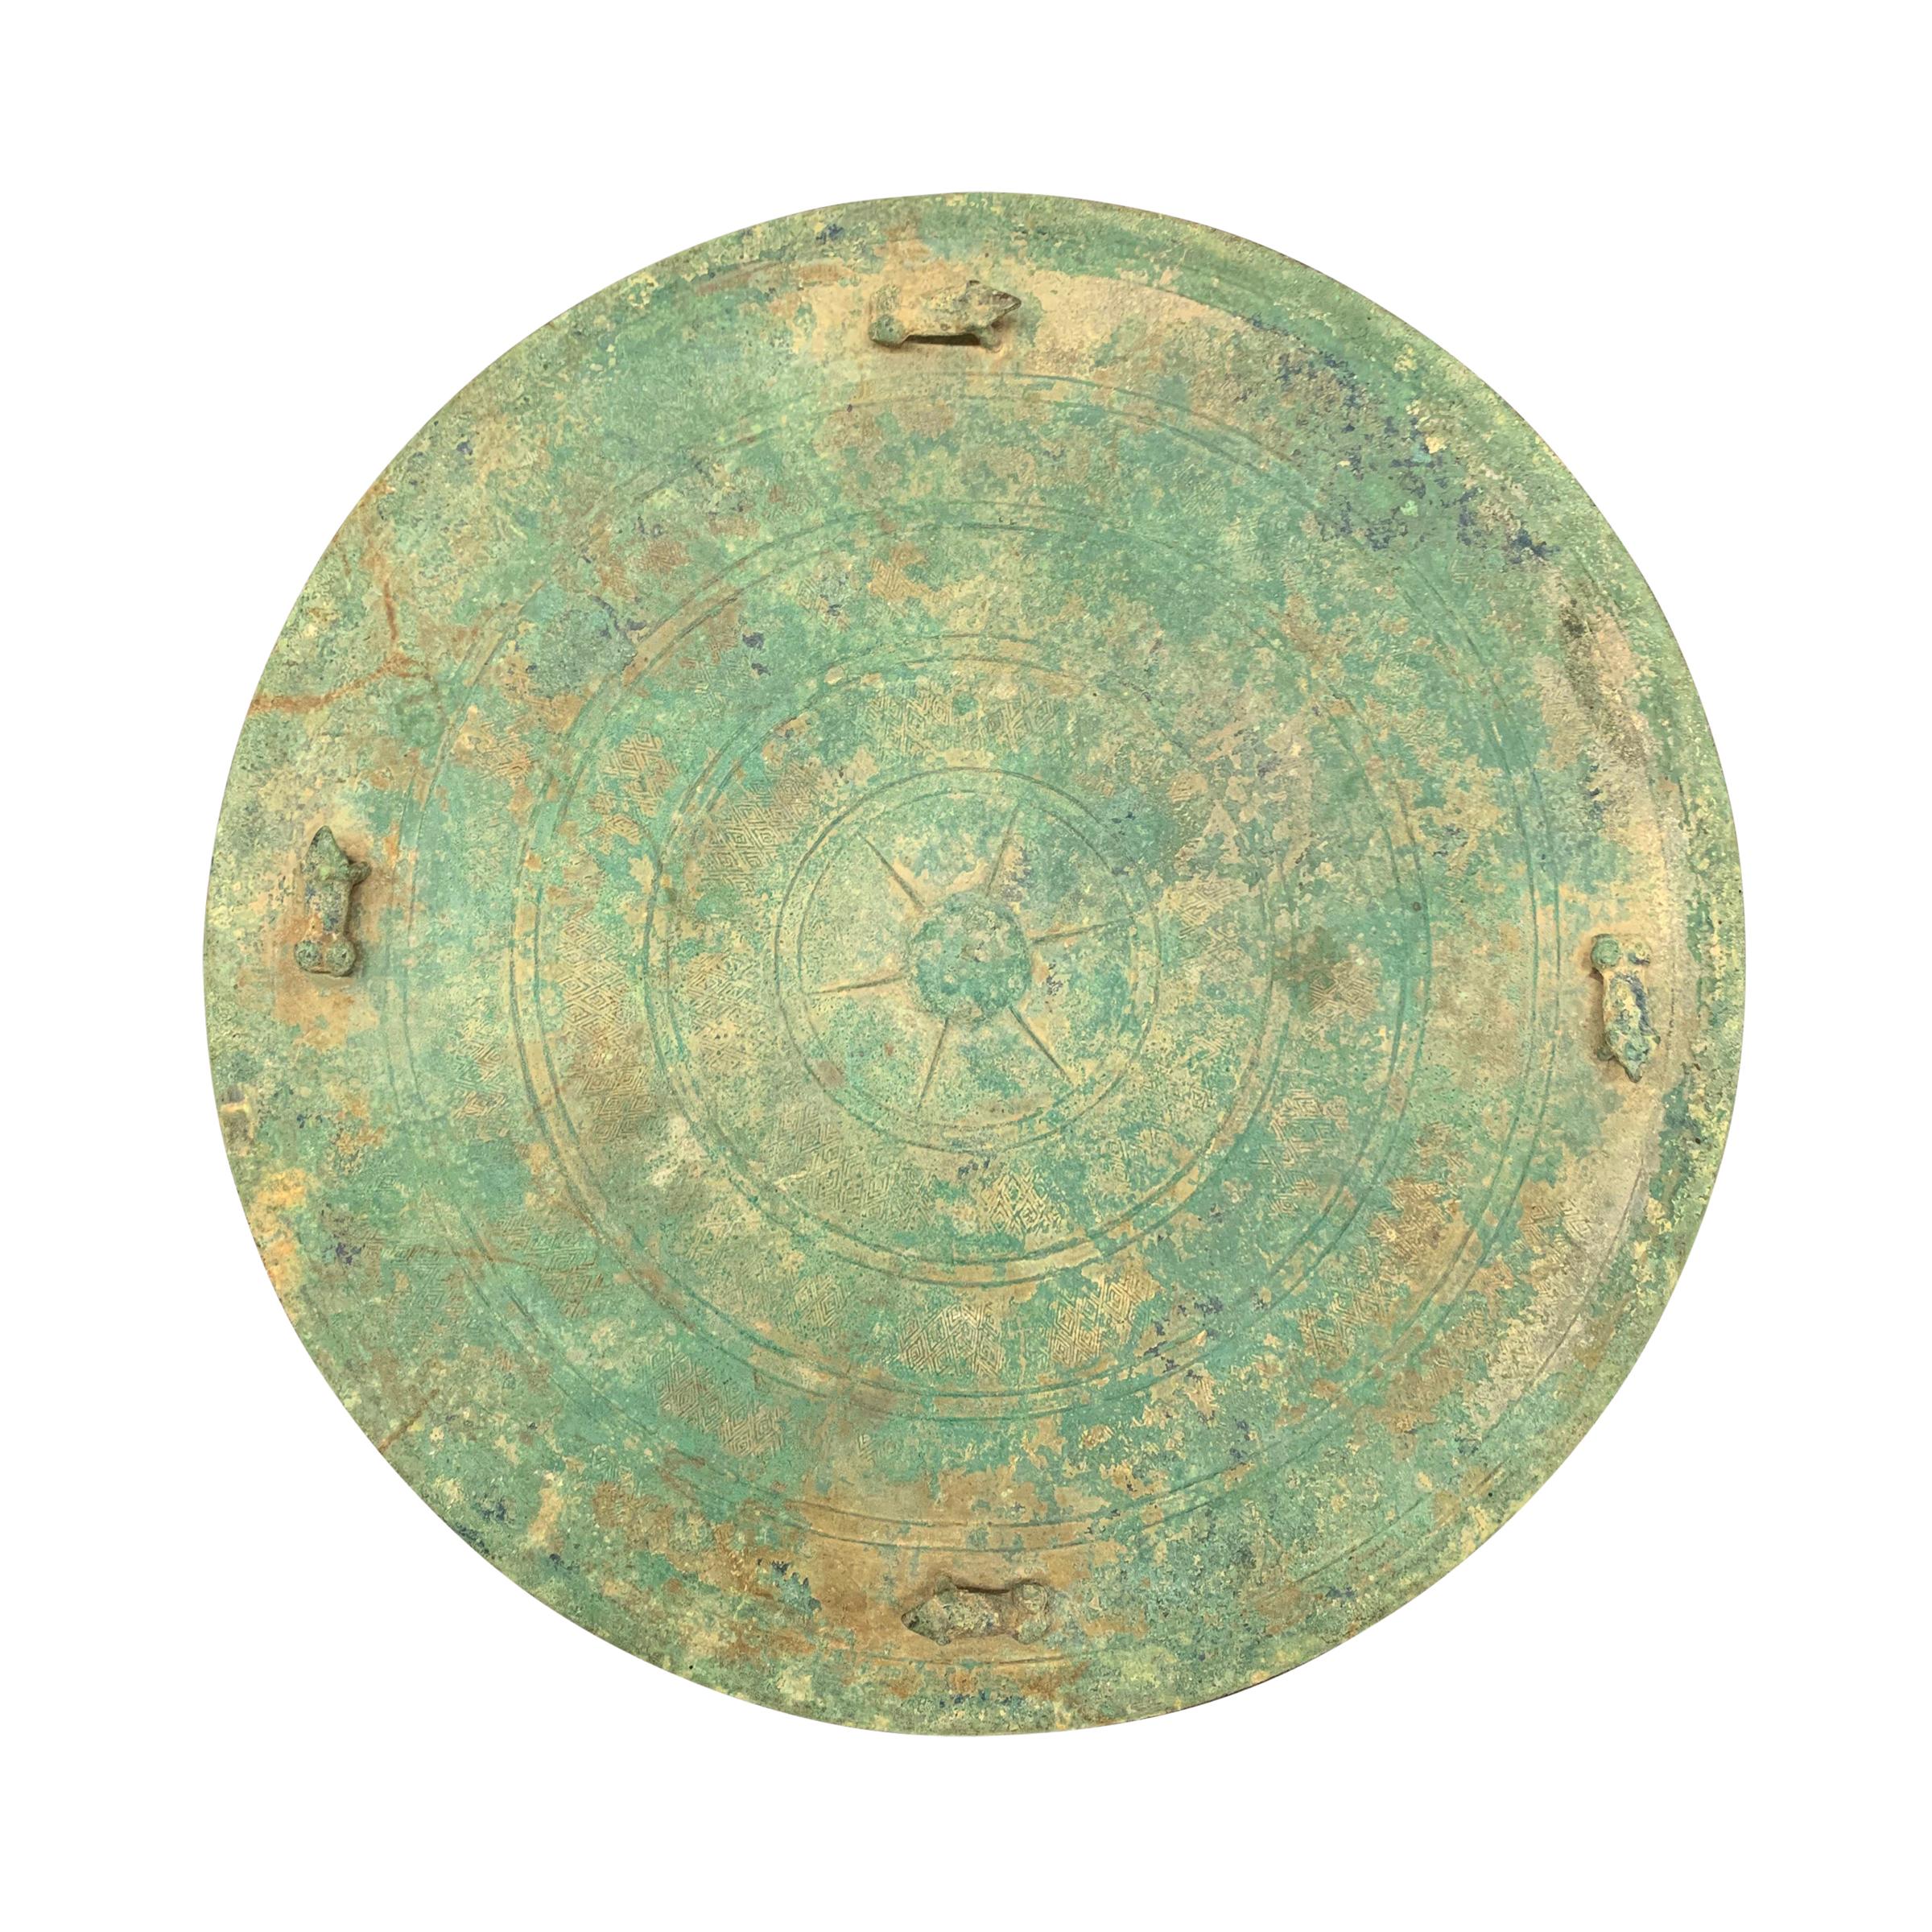 Dong Son Bronze Drum, 300 BC 5